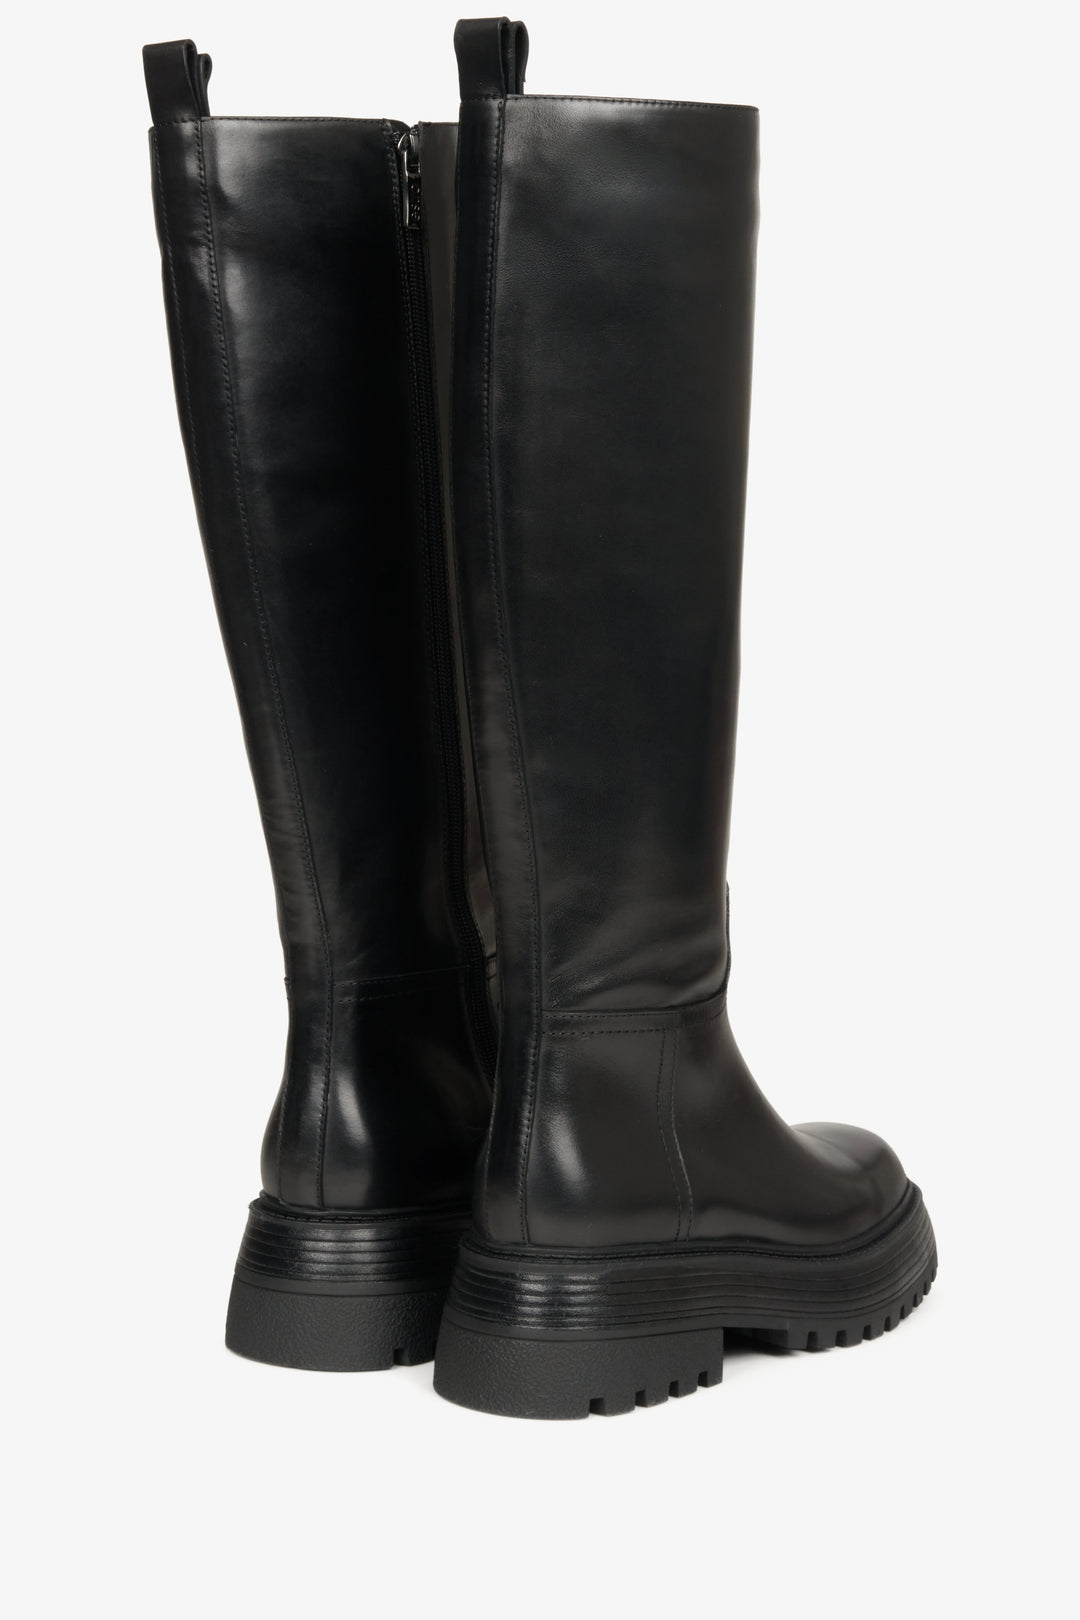 Elevated, women's spring boots made of black genuine leather by Estro - close-up of the heel and the back part of the shaft.